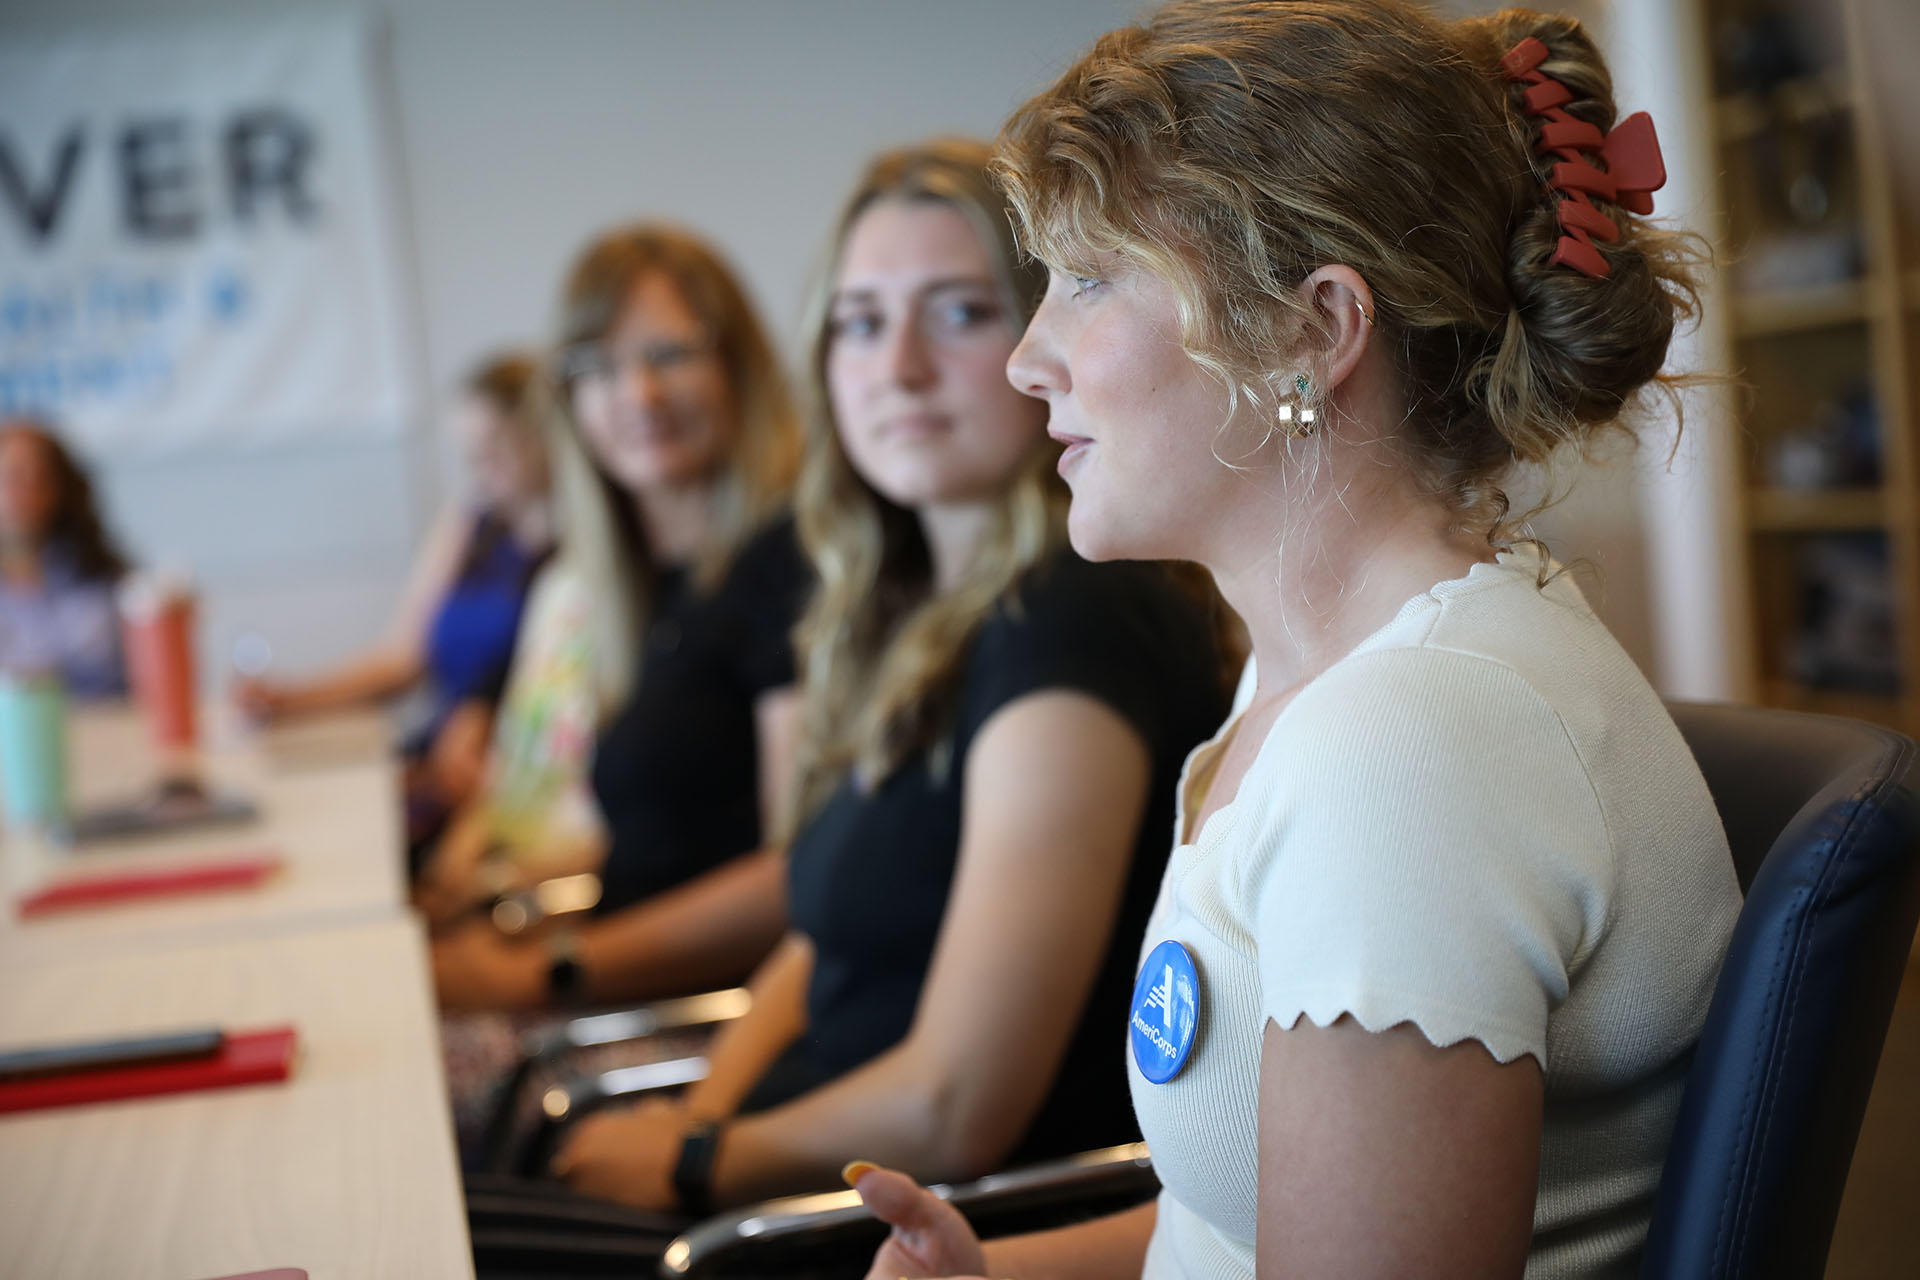 Public Health AmeriCorps member Emily Evans sits with fellow program members at a meeting at the Denver Department of Public Health and Environment